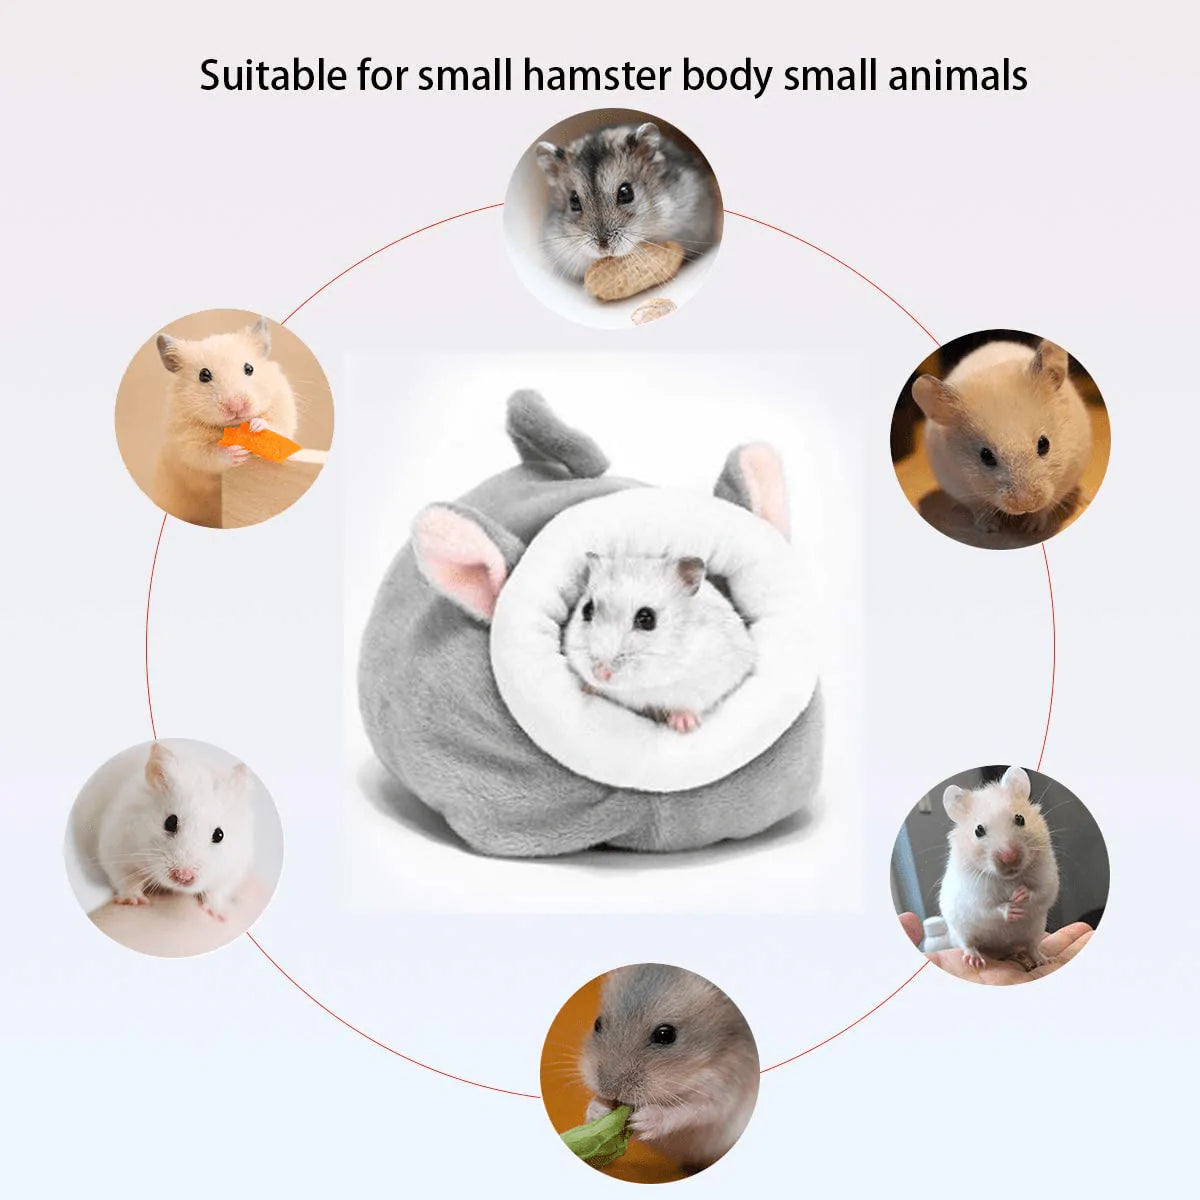 YUEKUA Bed House Soft Hamster House Bed, Cotton Nest and Cushion, Small Pet Animal Habitat Warm Nest Bed Accessories for Hamsters, Guinea Pigs, Hedgehogs